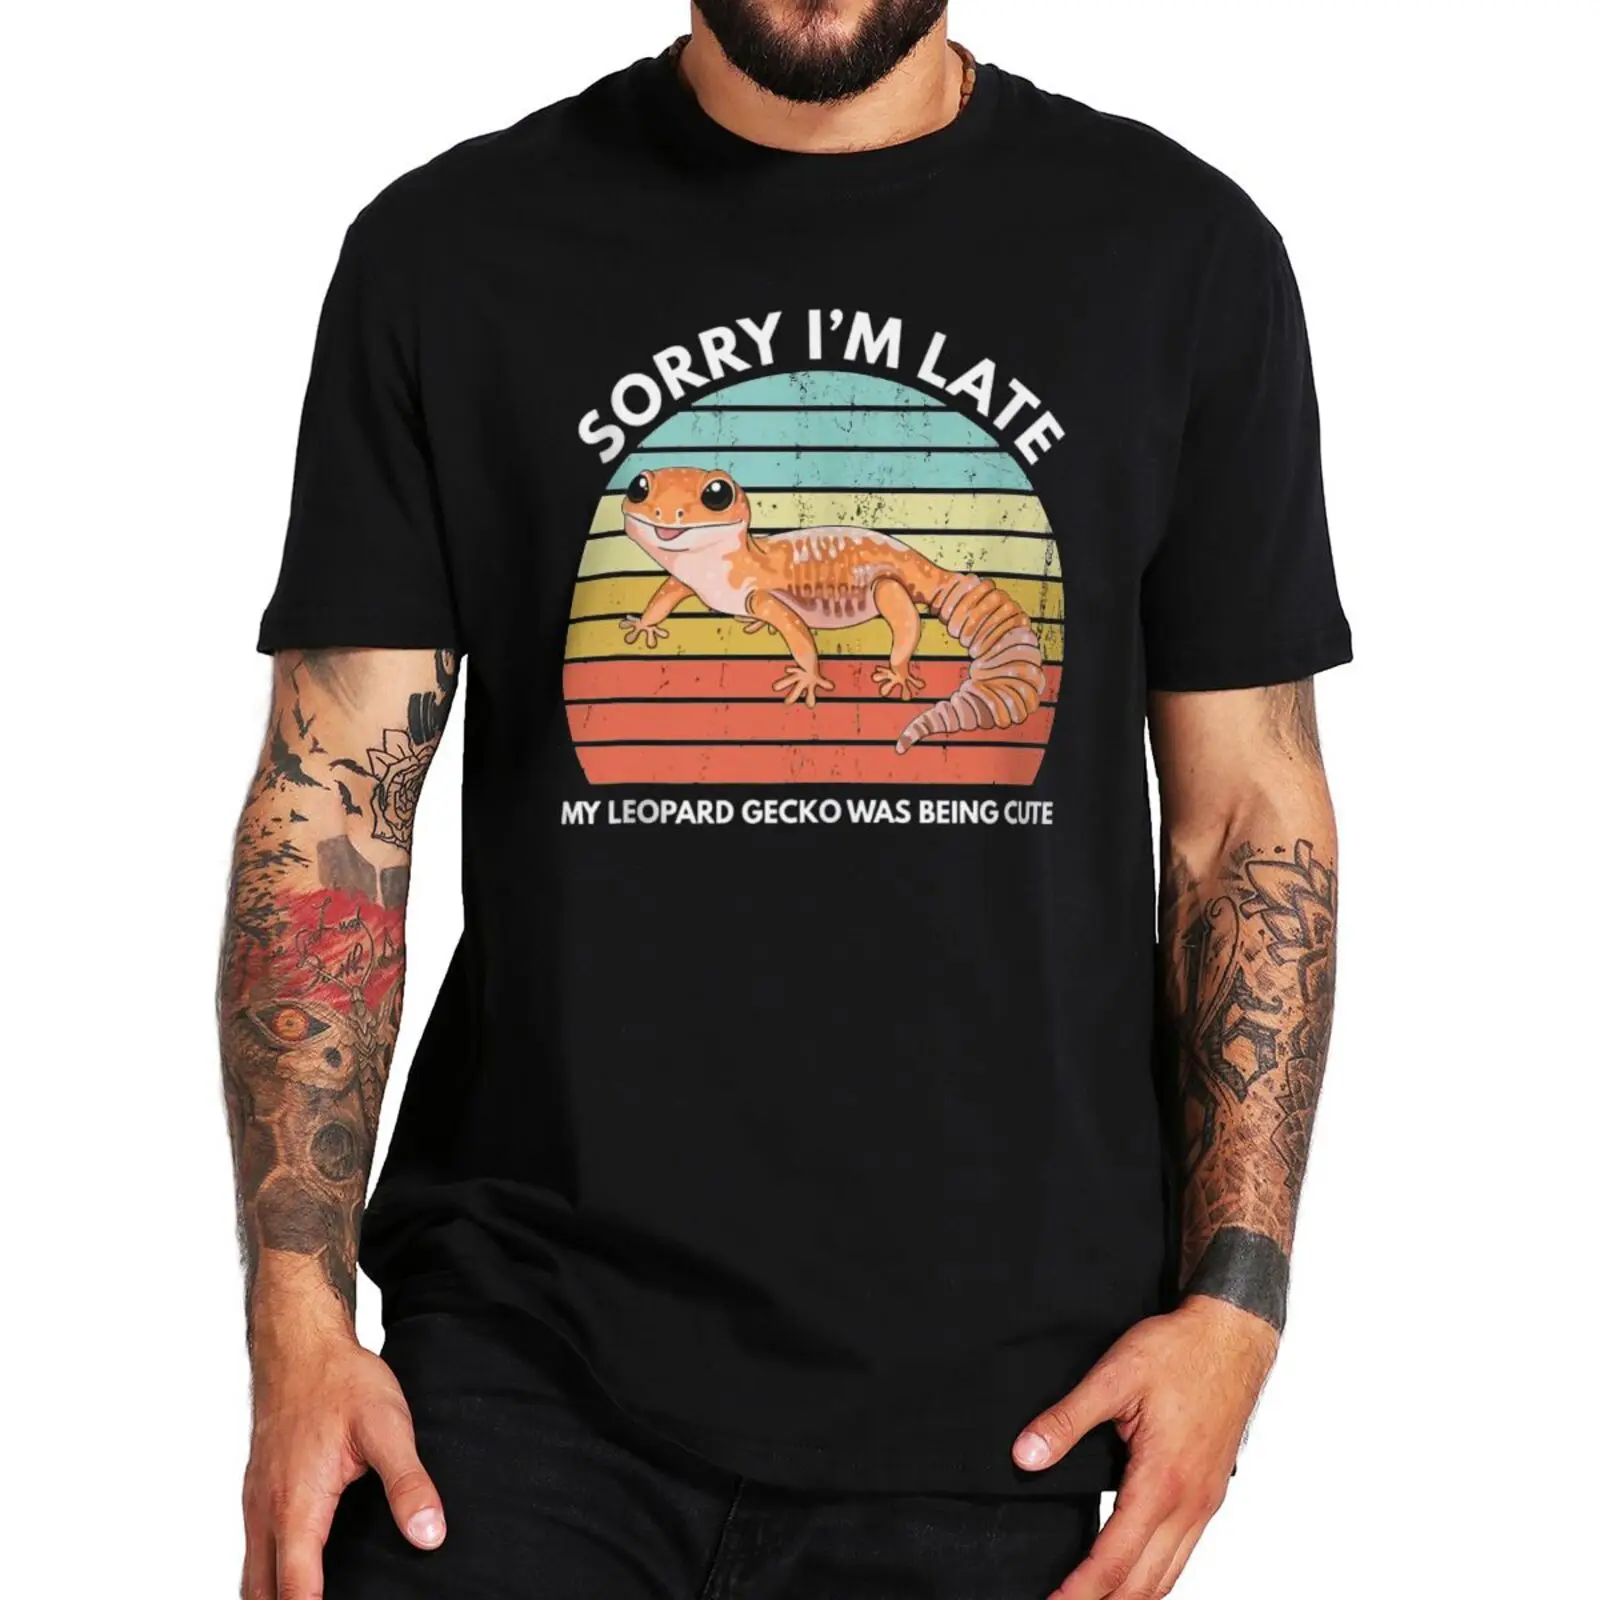 

Sorry I'm Late My Leopard Gecko Was Being Cute T Shirt Funny Gecko Vintage Design Unisex Tee Shirt 100% Cotton Camiseta